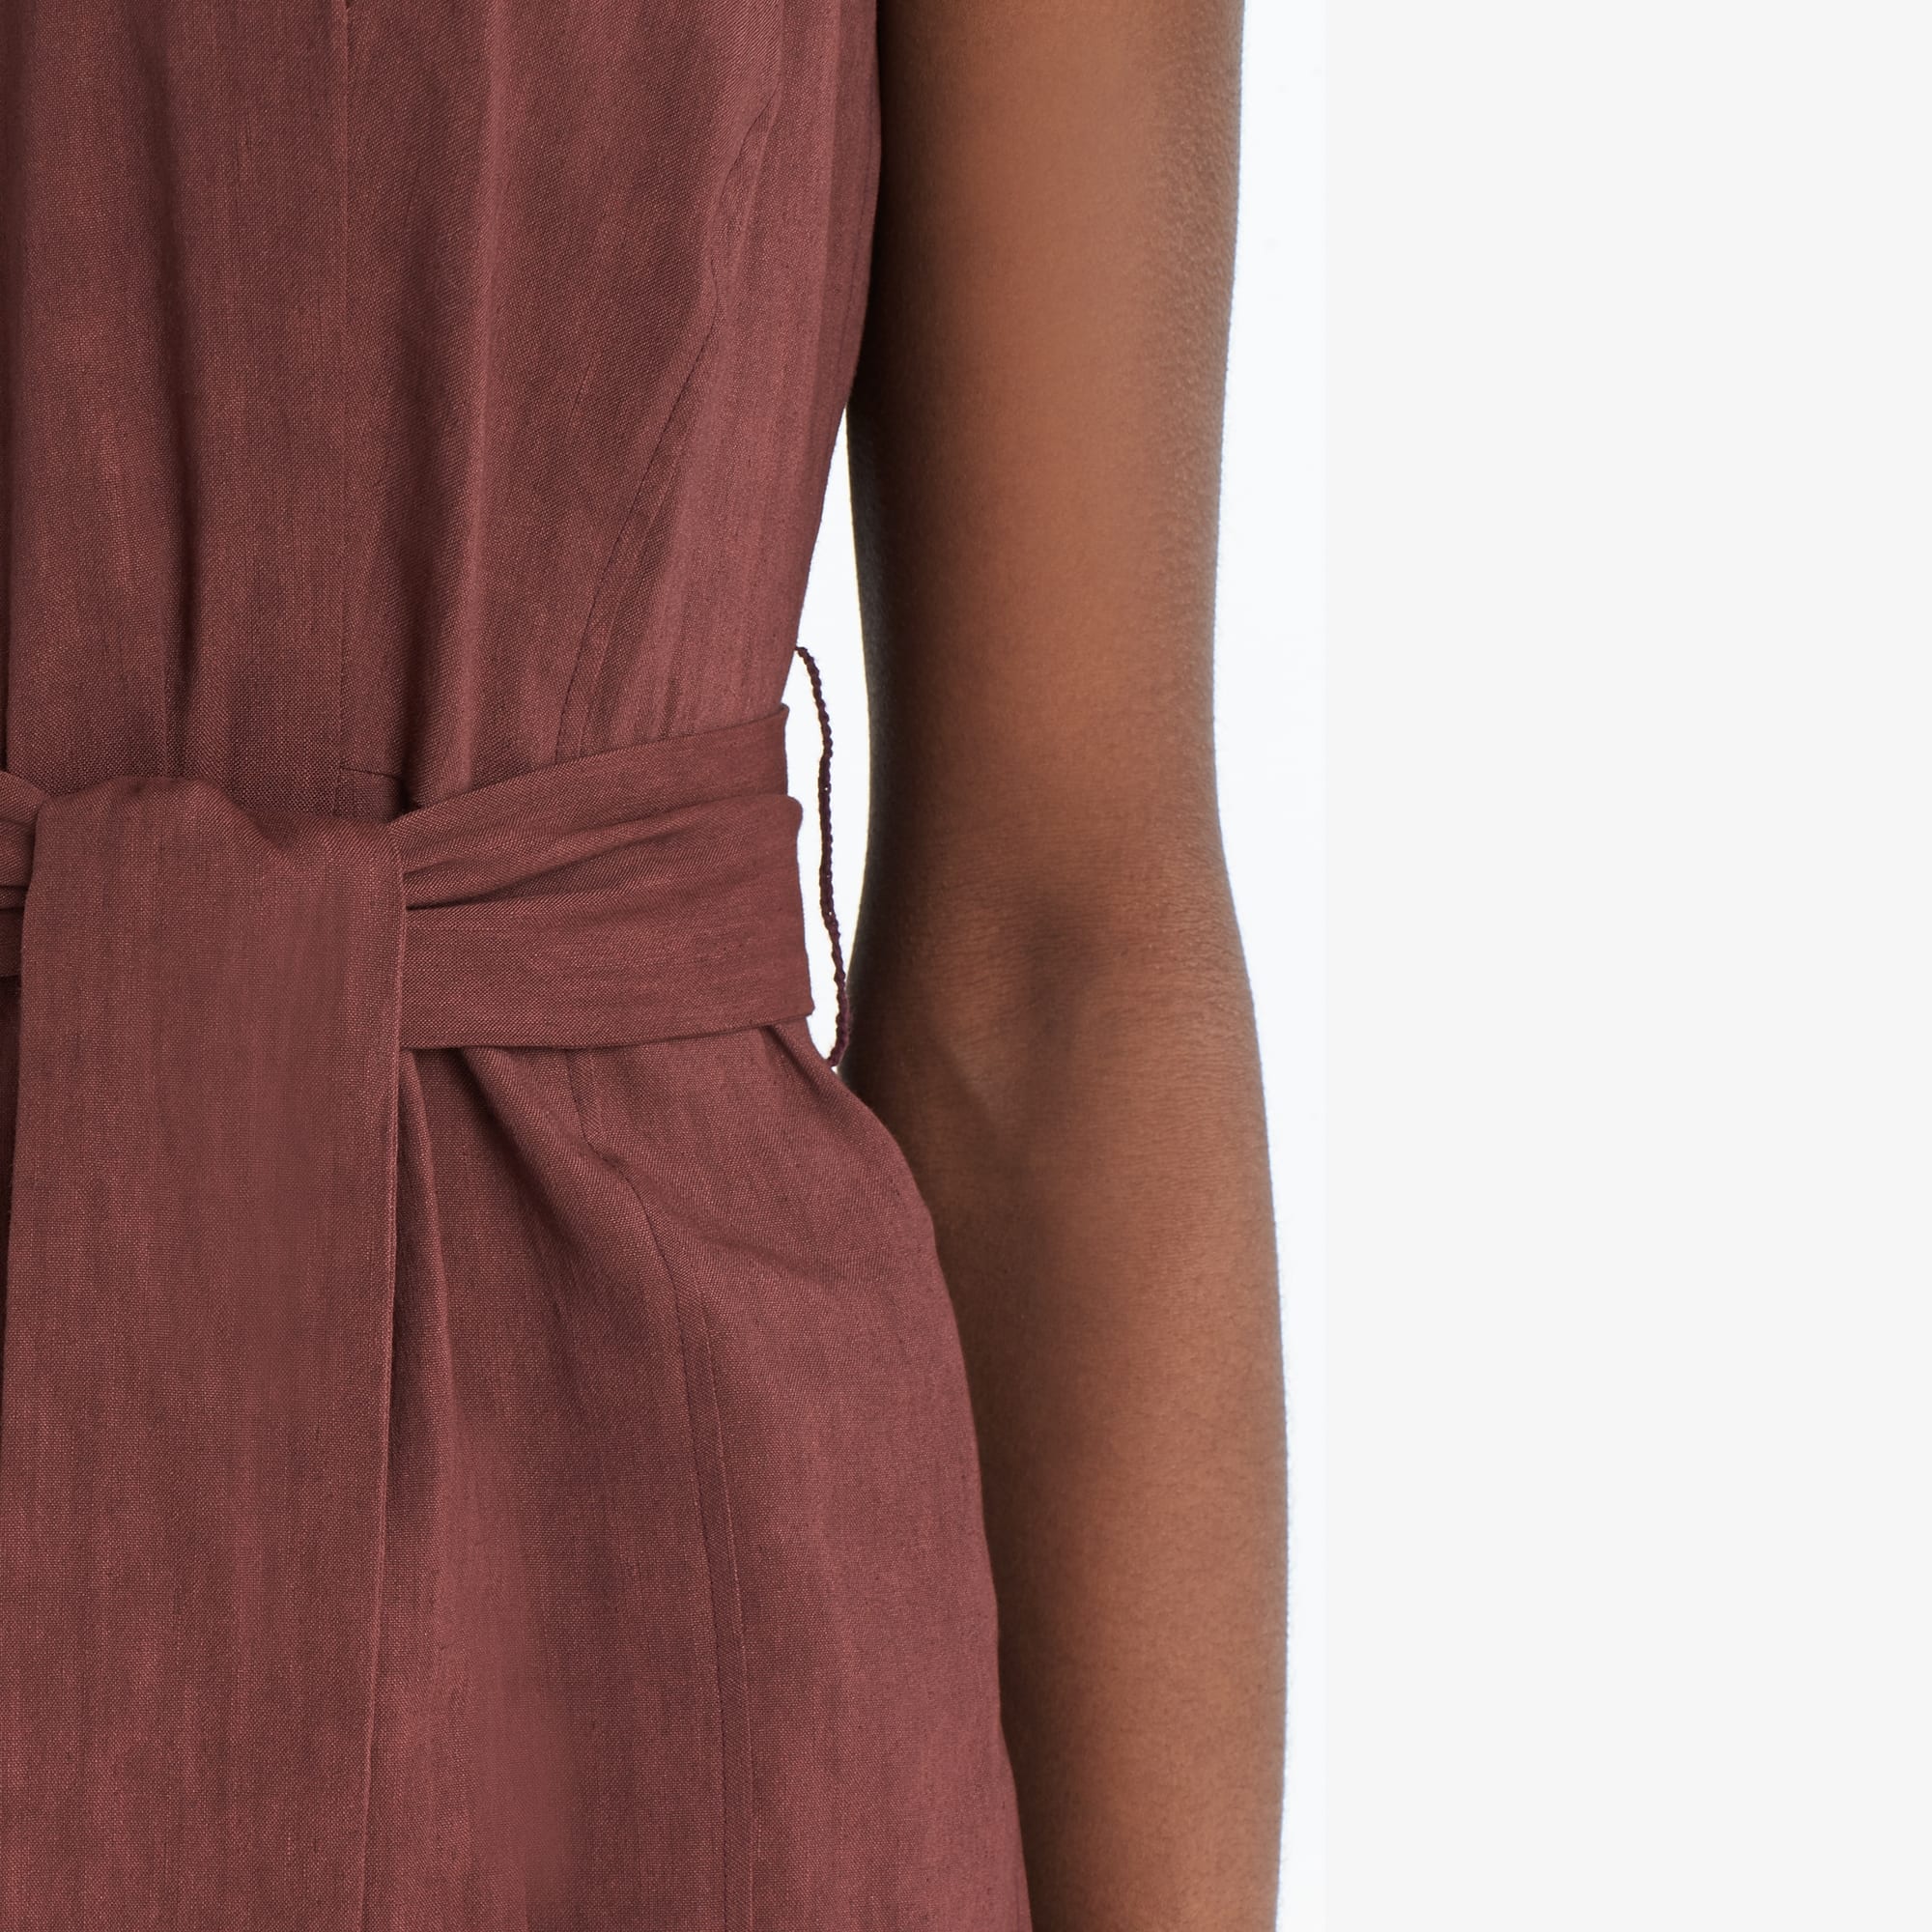 Detail image of a woman standing wearing the Angelina top stretch linen in sumac